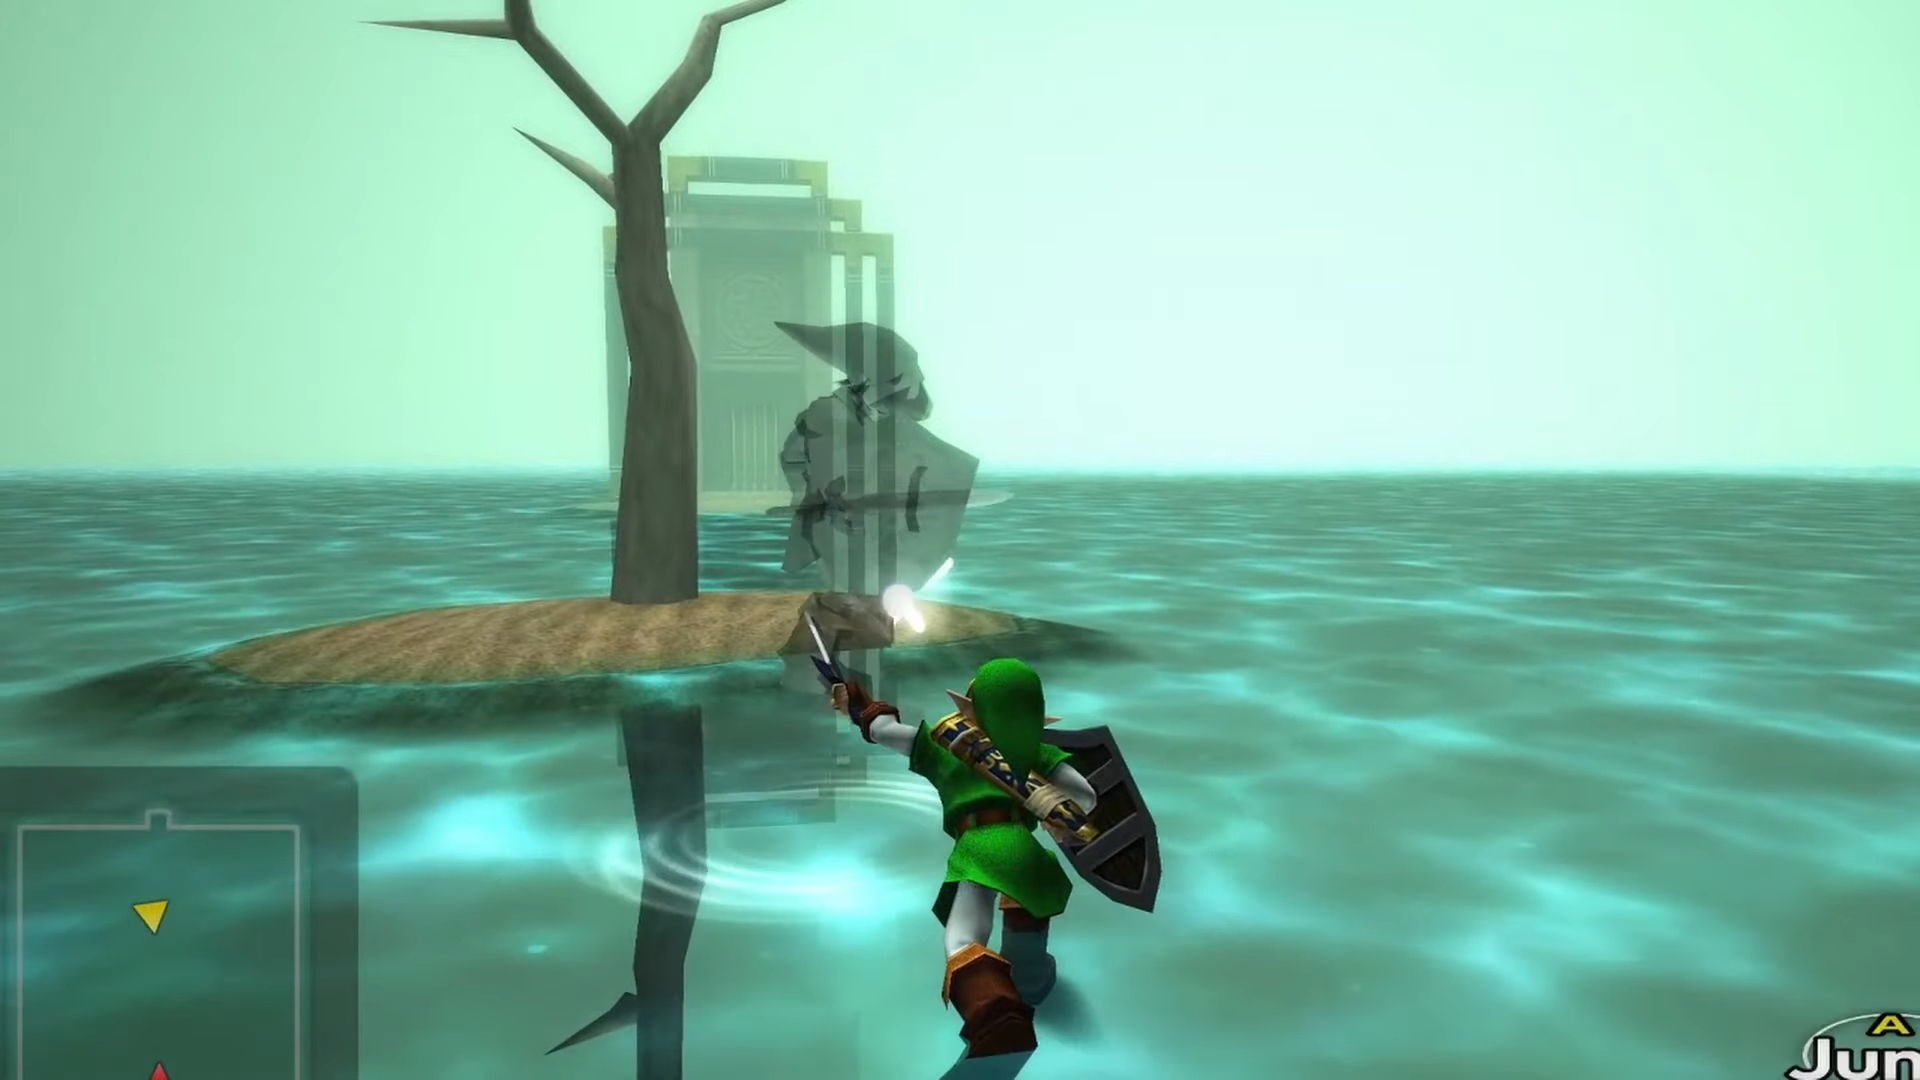 Dark Link making a fool out of link.